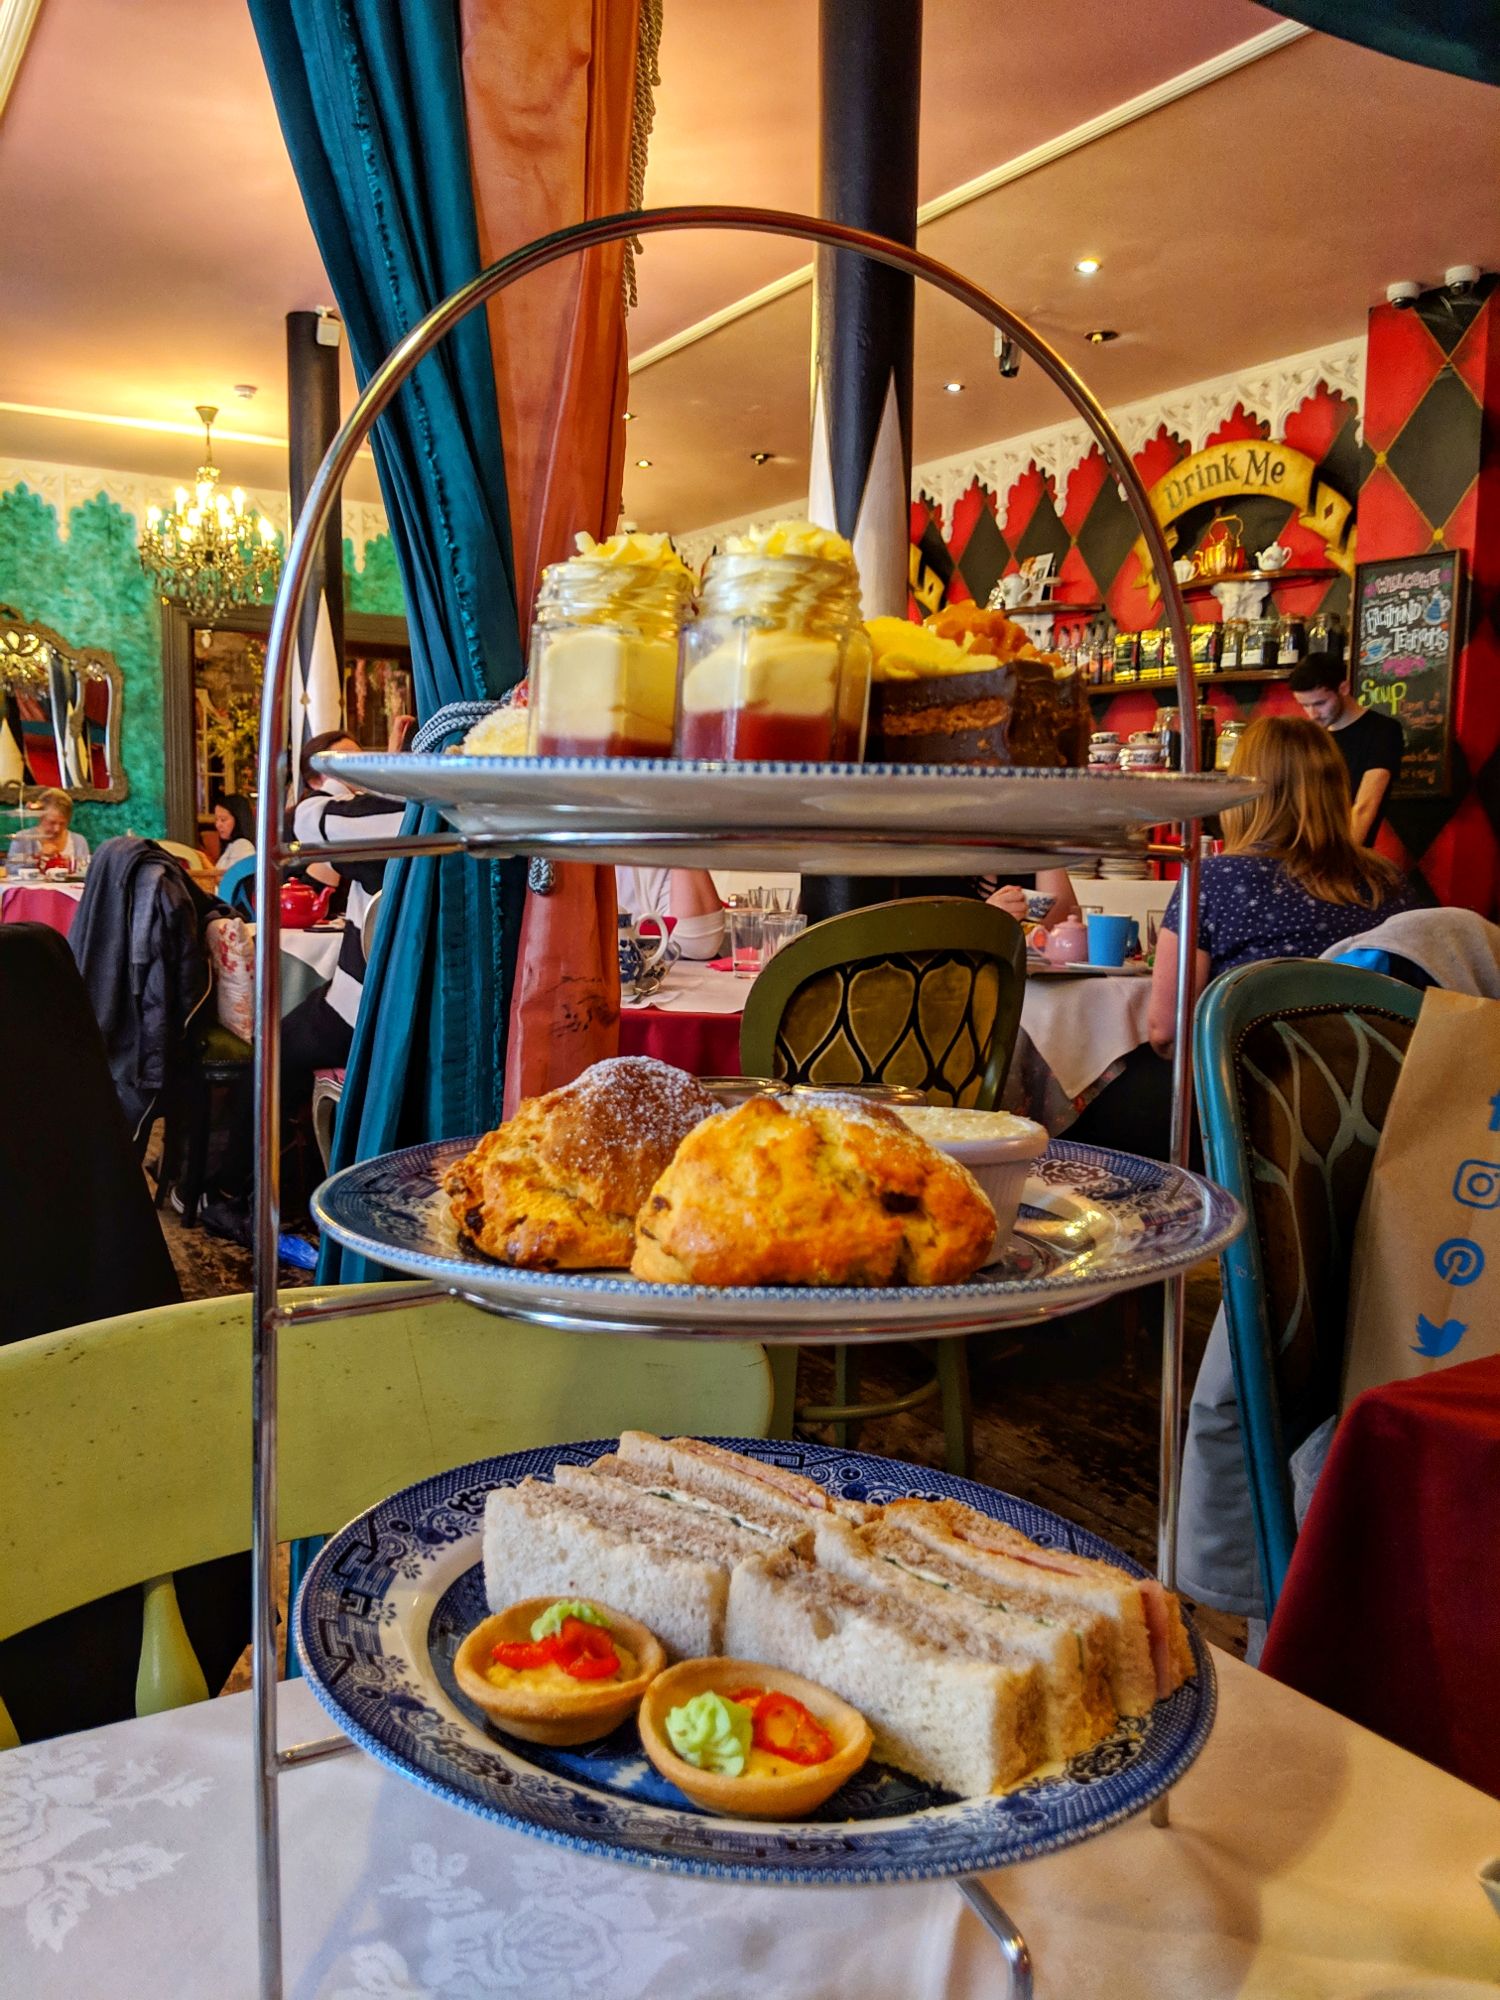 Afternoon tea on a cake stand. Sandwiches on the bottom layer, scones cream and jam on the middle layer and  cakes on the top layer. In the background is the serving area with eat me and drink me in large writing on the wall